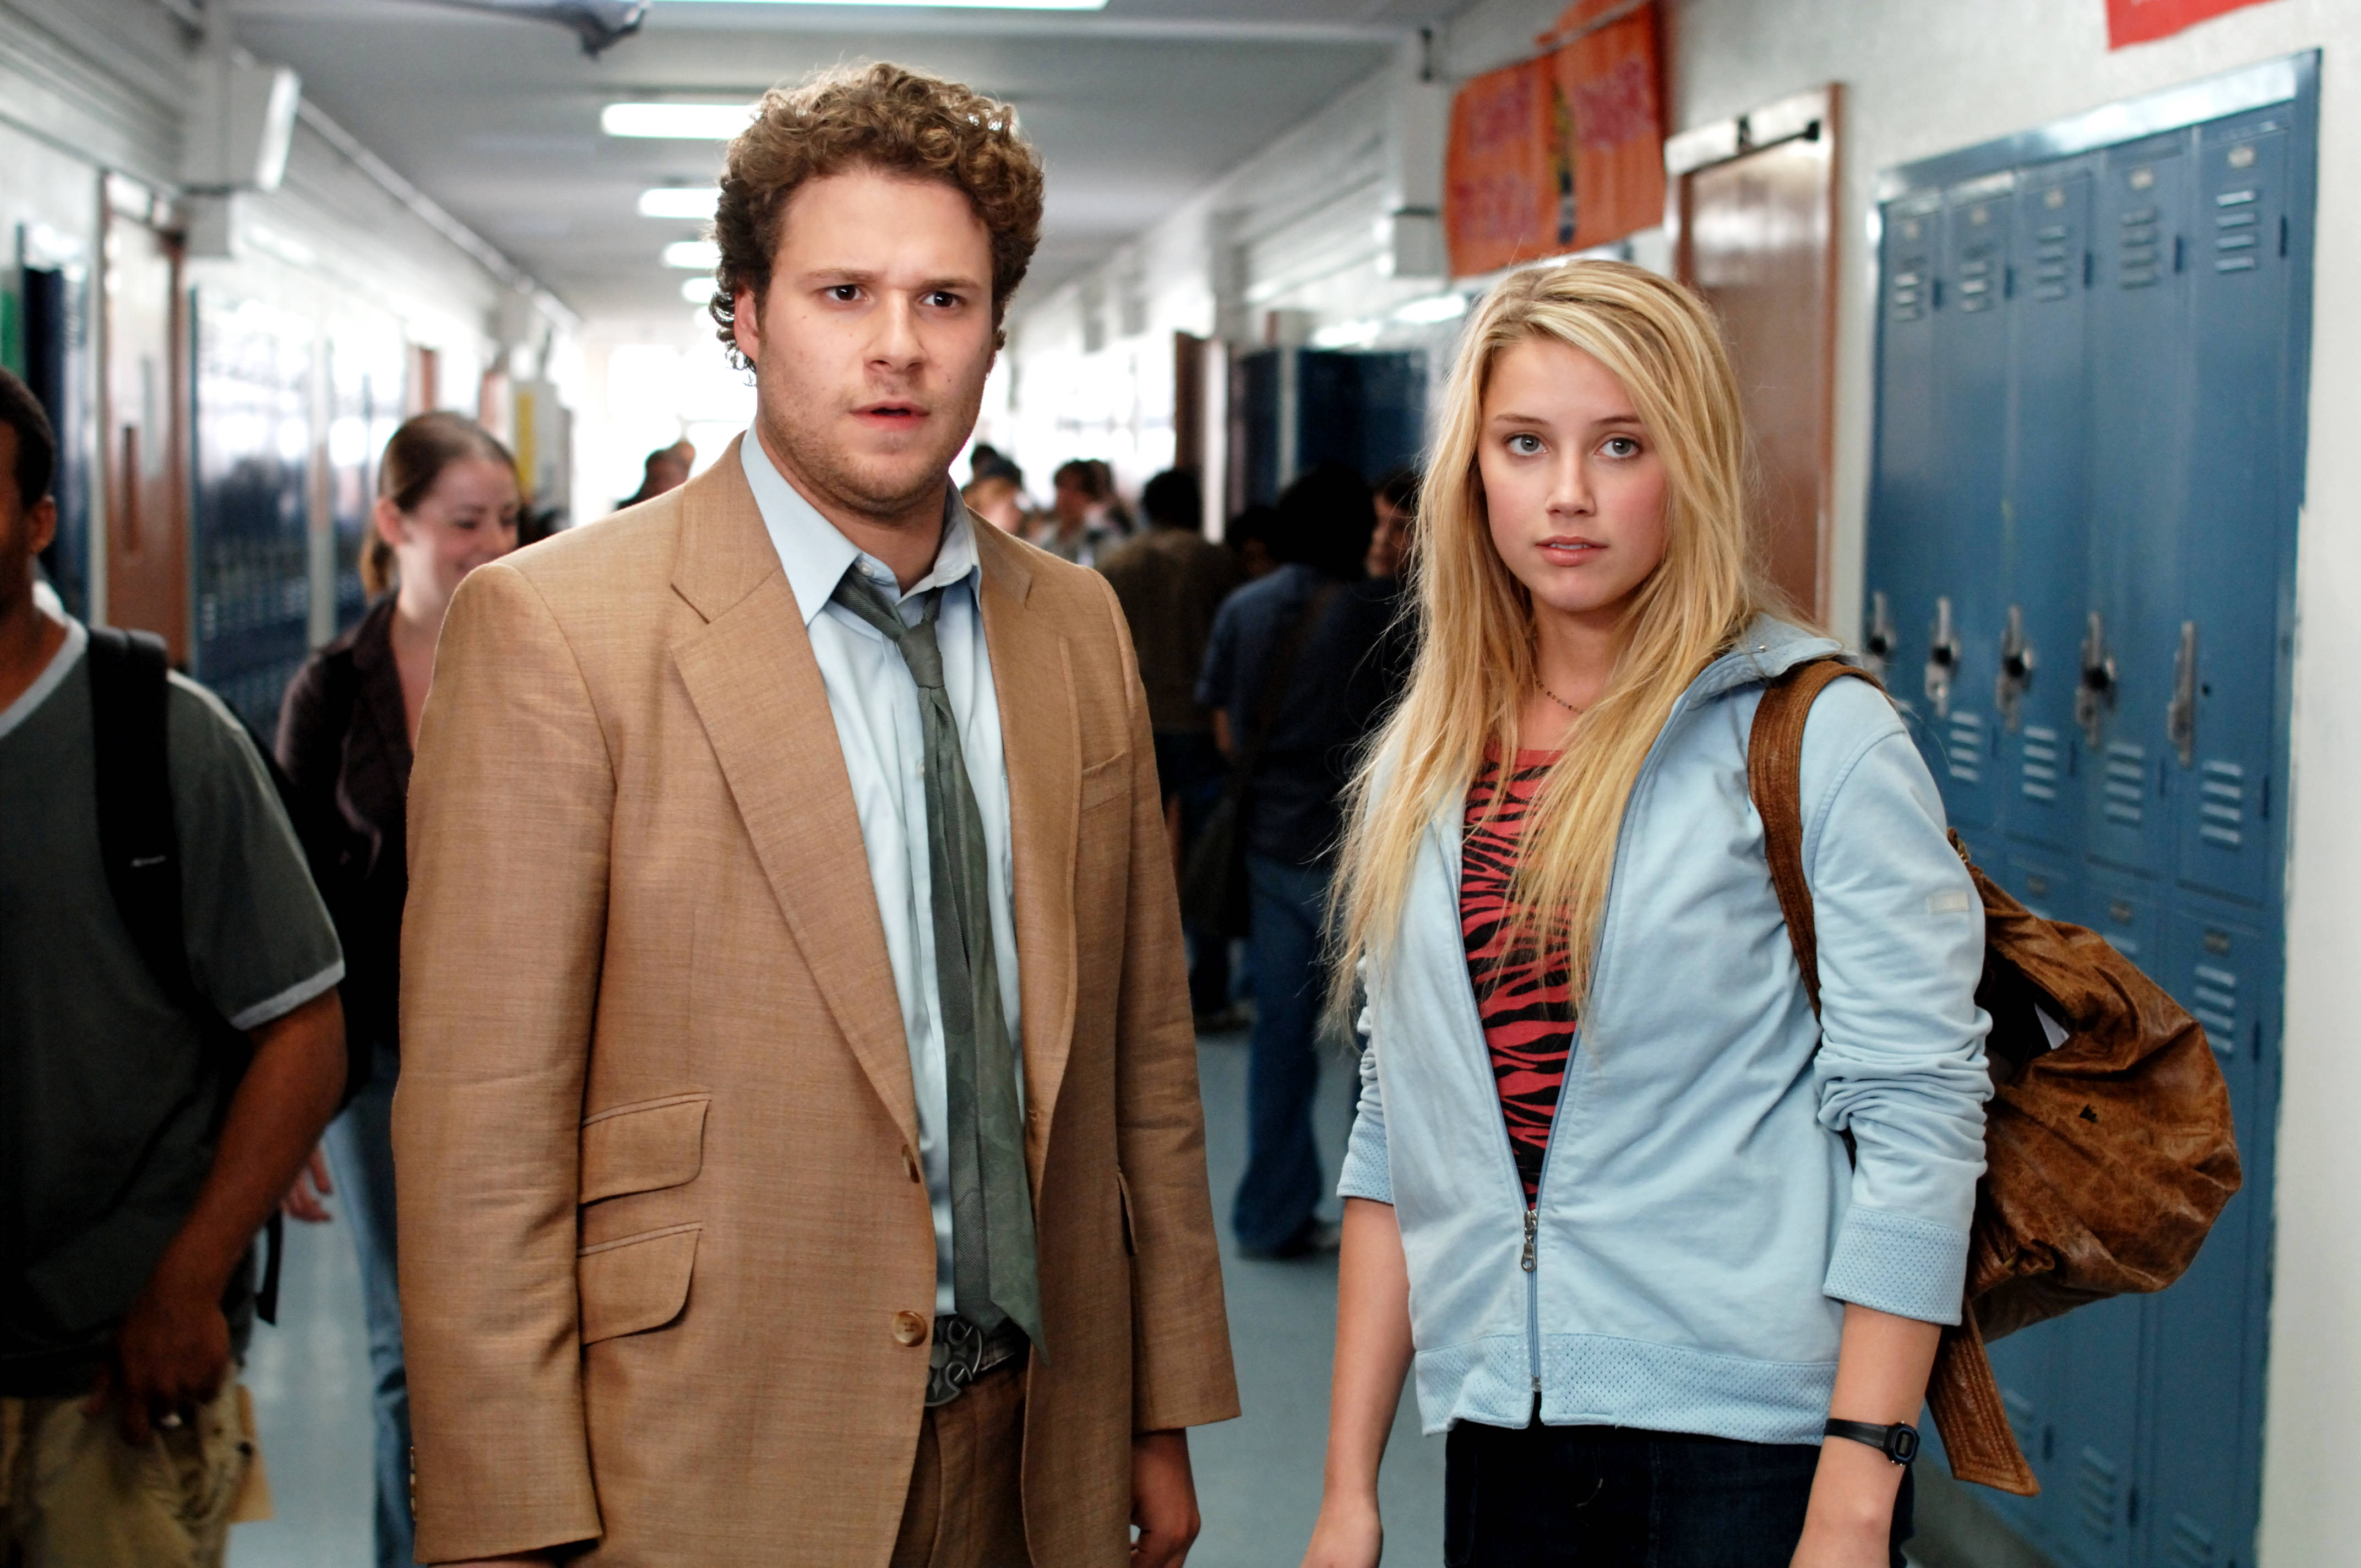 Seth Rogen stars as Dale Denton and Amber Heard stars as Angie Anderson in Columbia Pictures' Pineapple Express (2008)